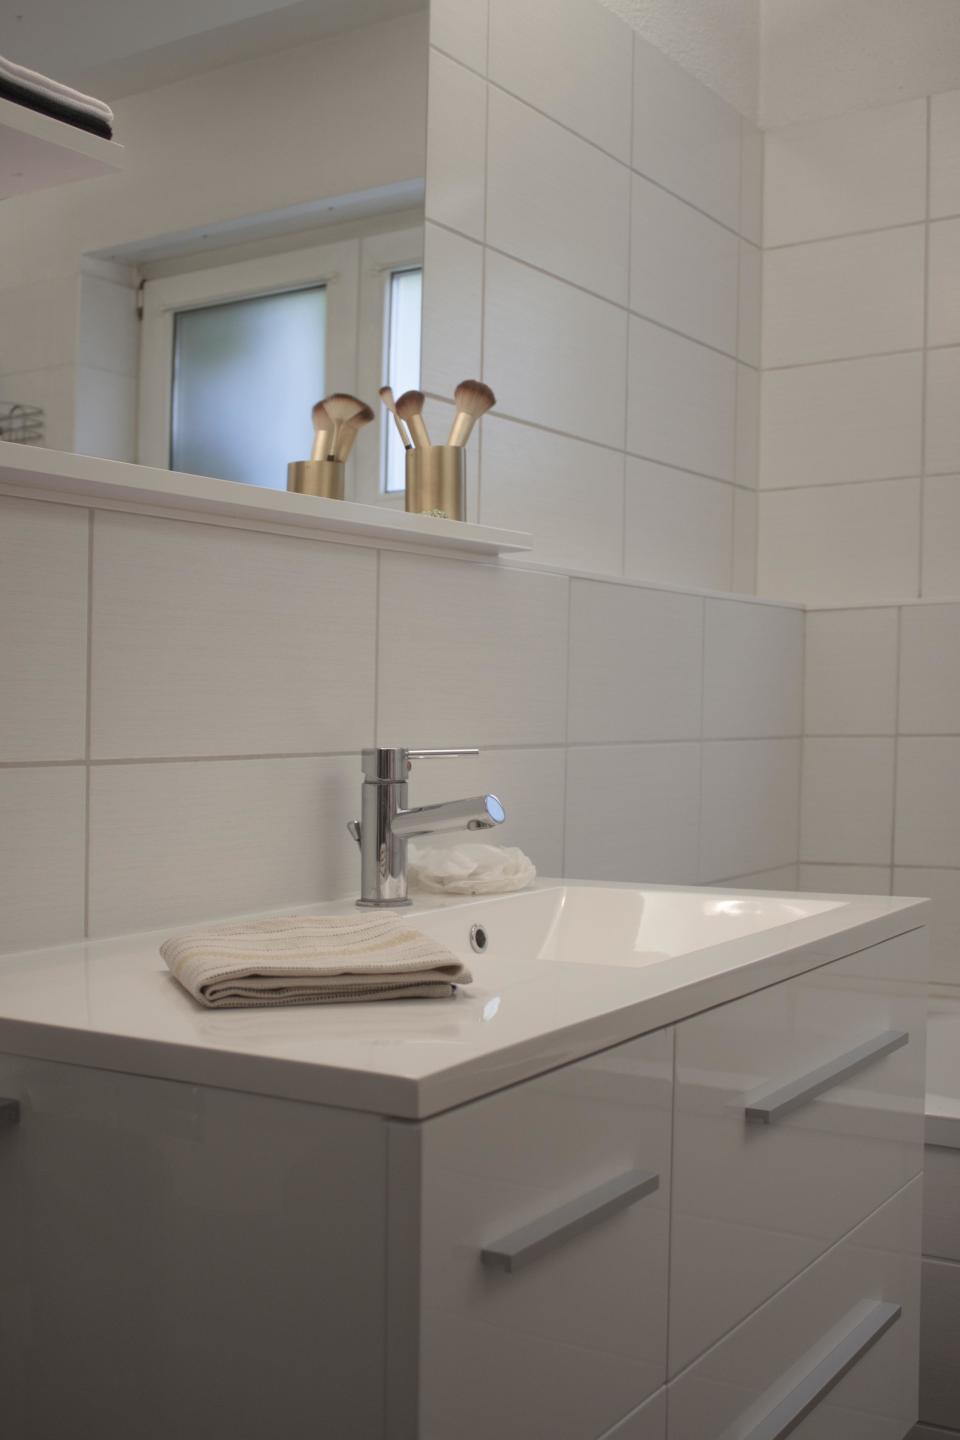 The bathroom employs simple fixtures and white walls, and a few floating shelves that lay flush against the left side of the mirror for extra bits and bobs. The convenient ledge that edges the entire bathroom is typical of German bathrooms—it’s where all the pipes are!